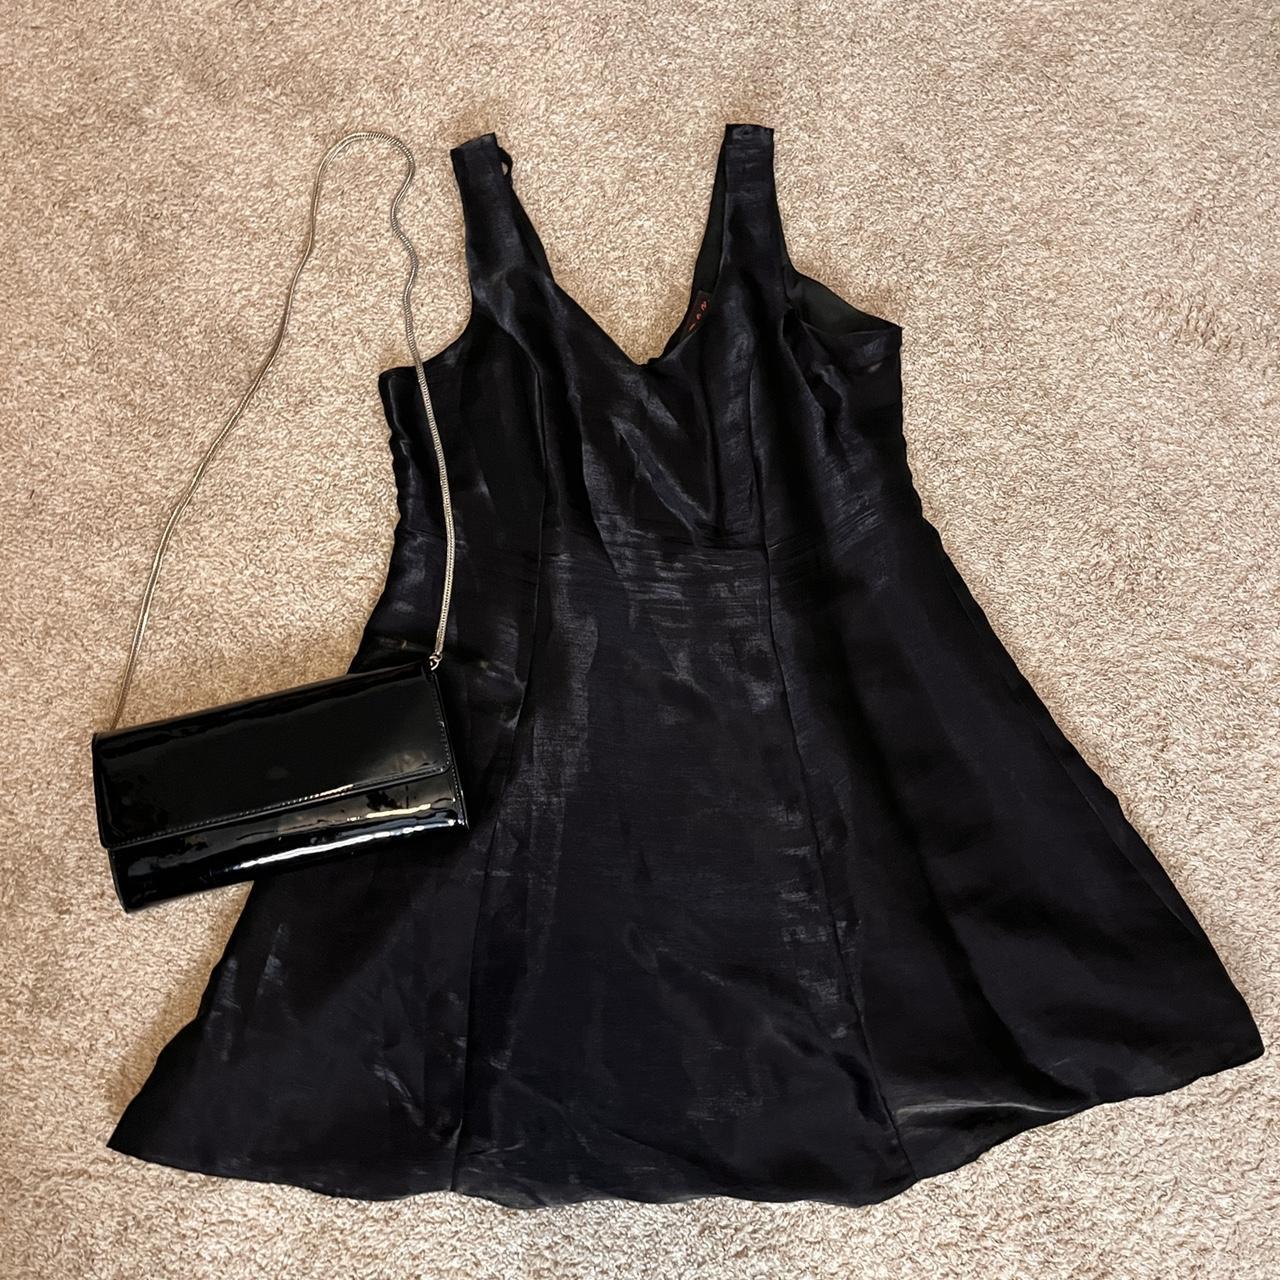 All Black Women's Black and Silver Dress